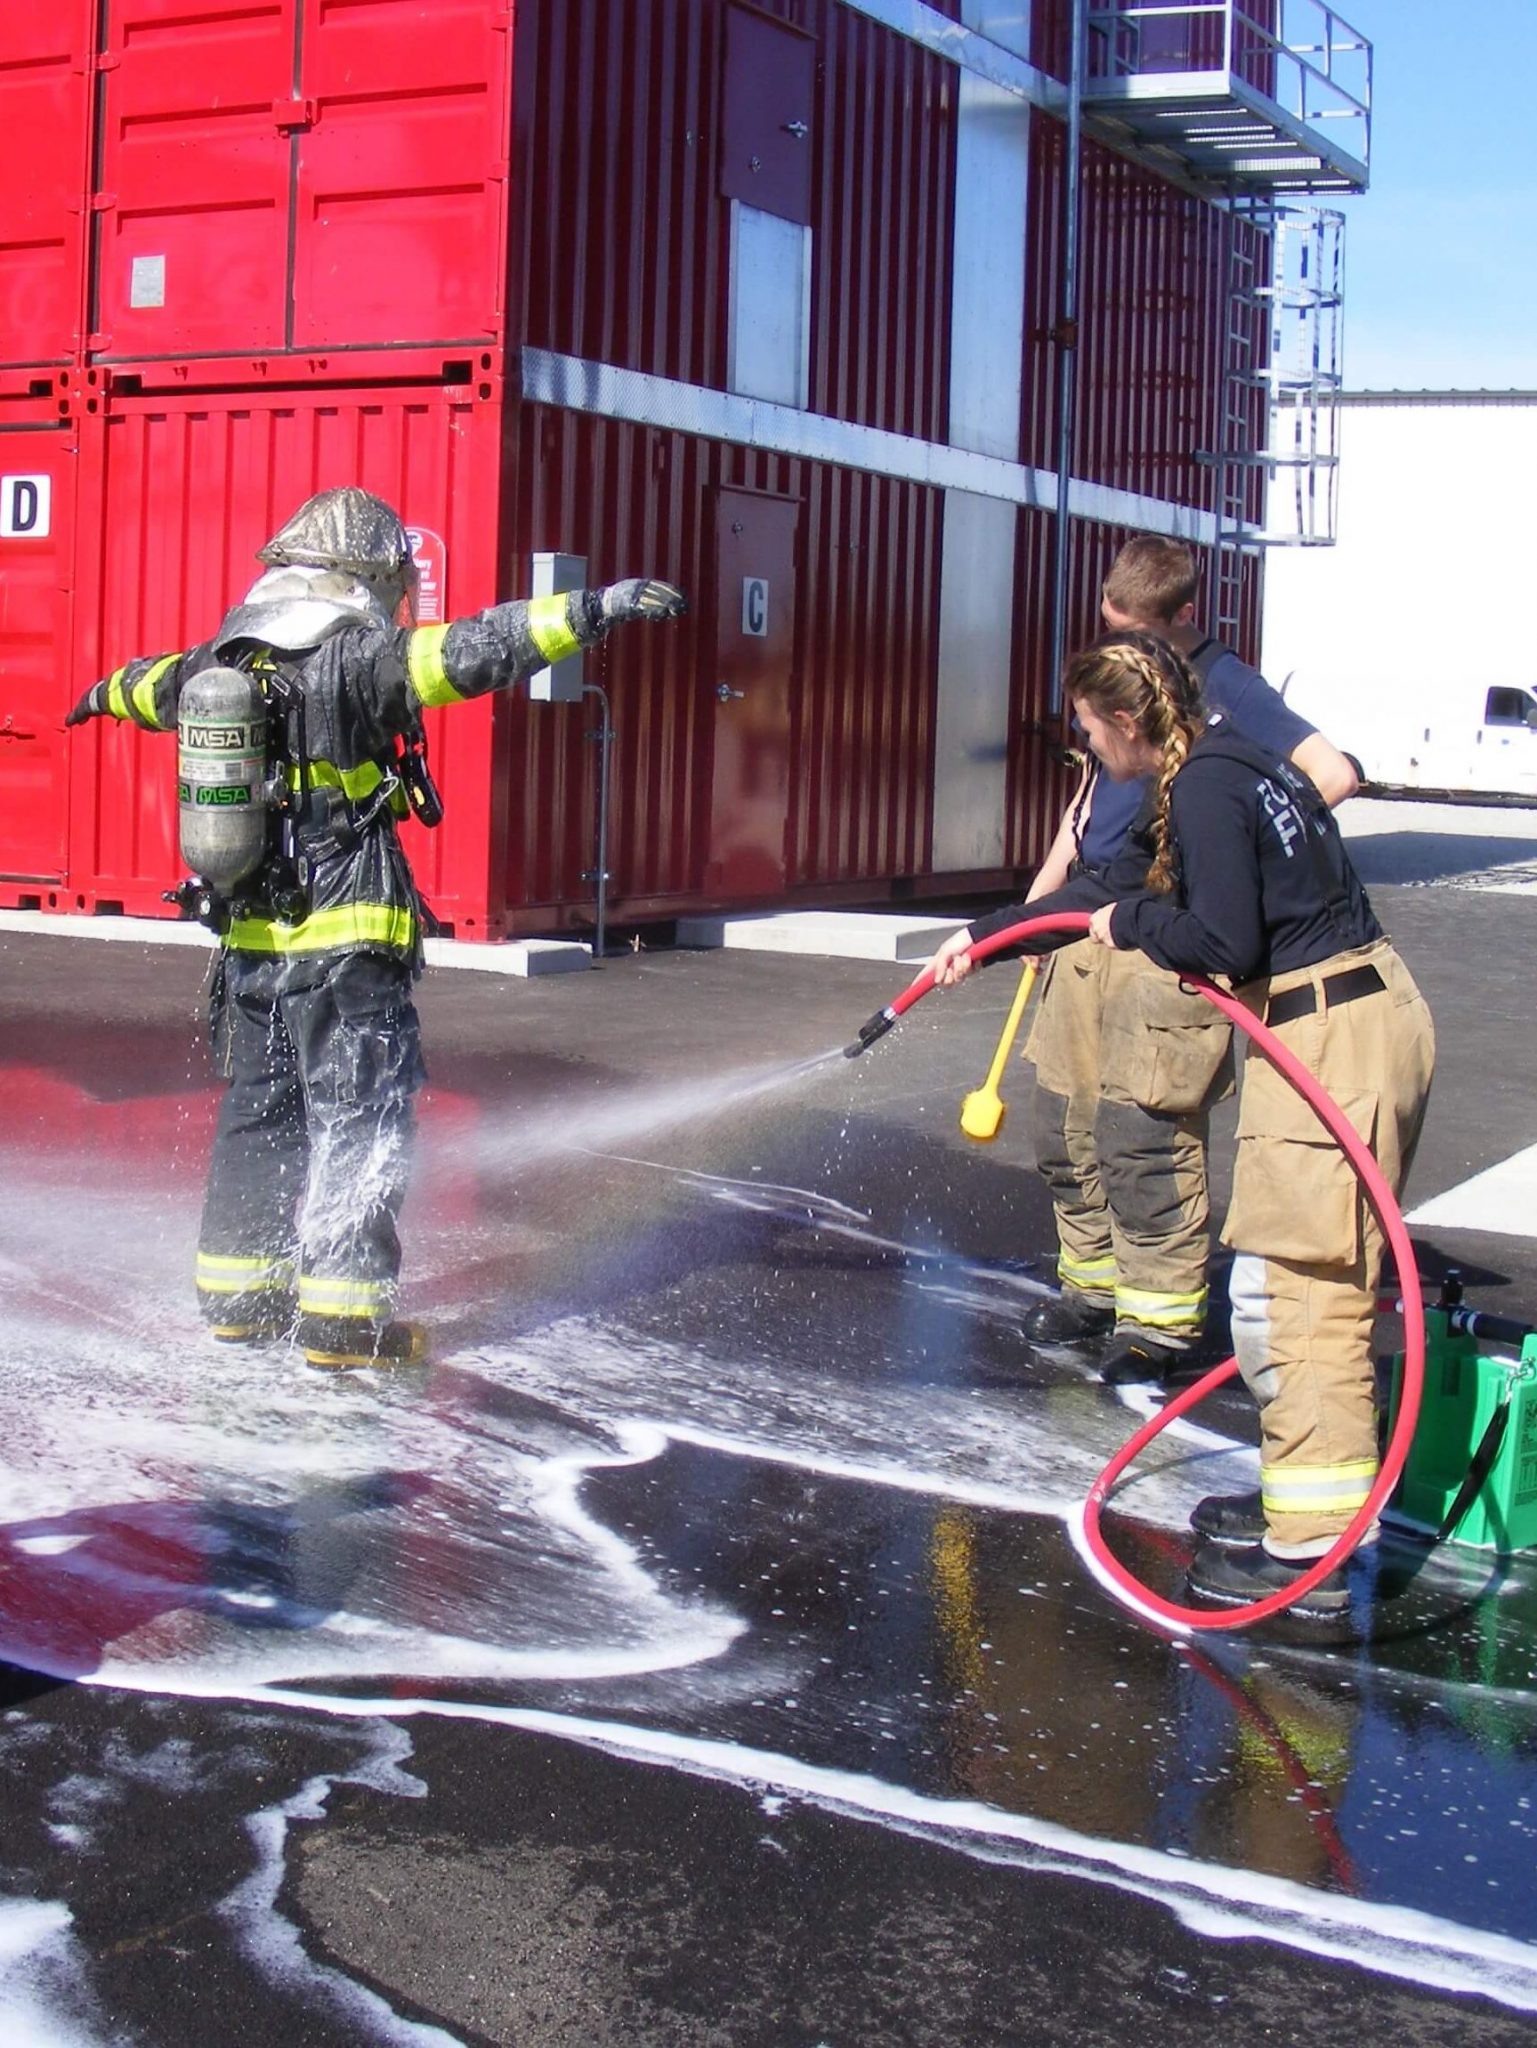 Firefighters Being Decontaminated